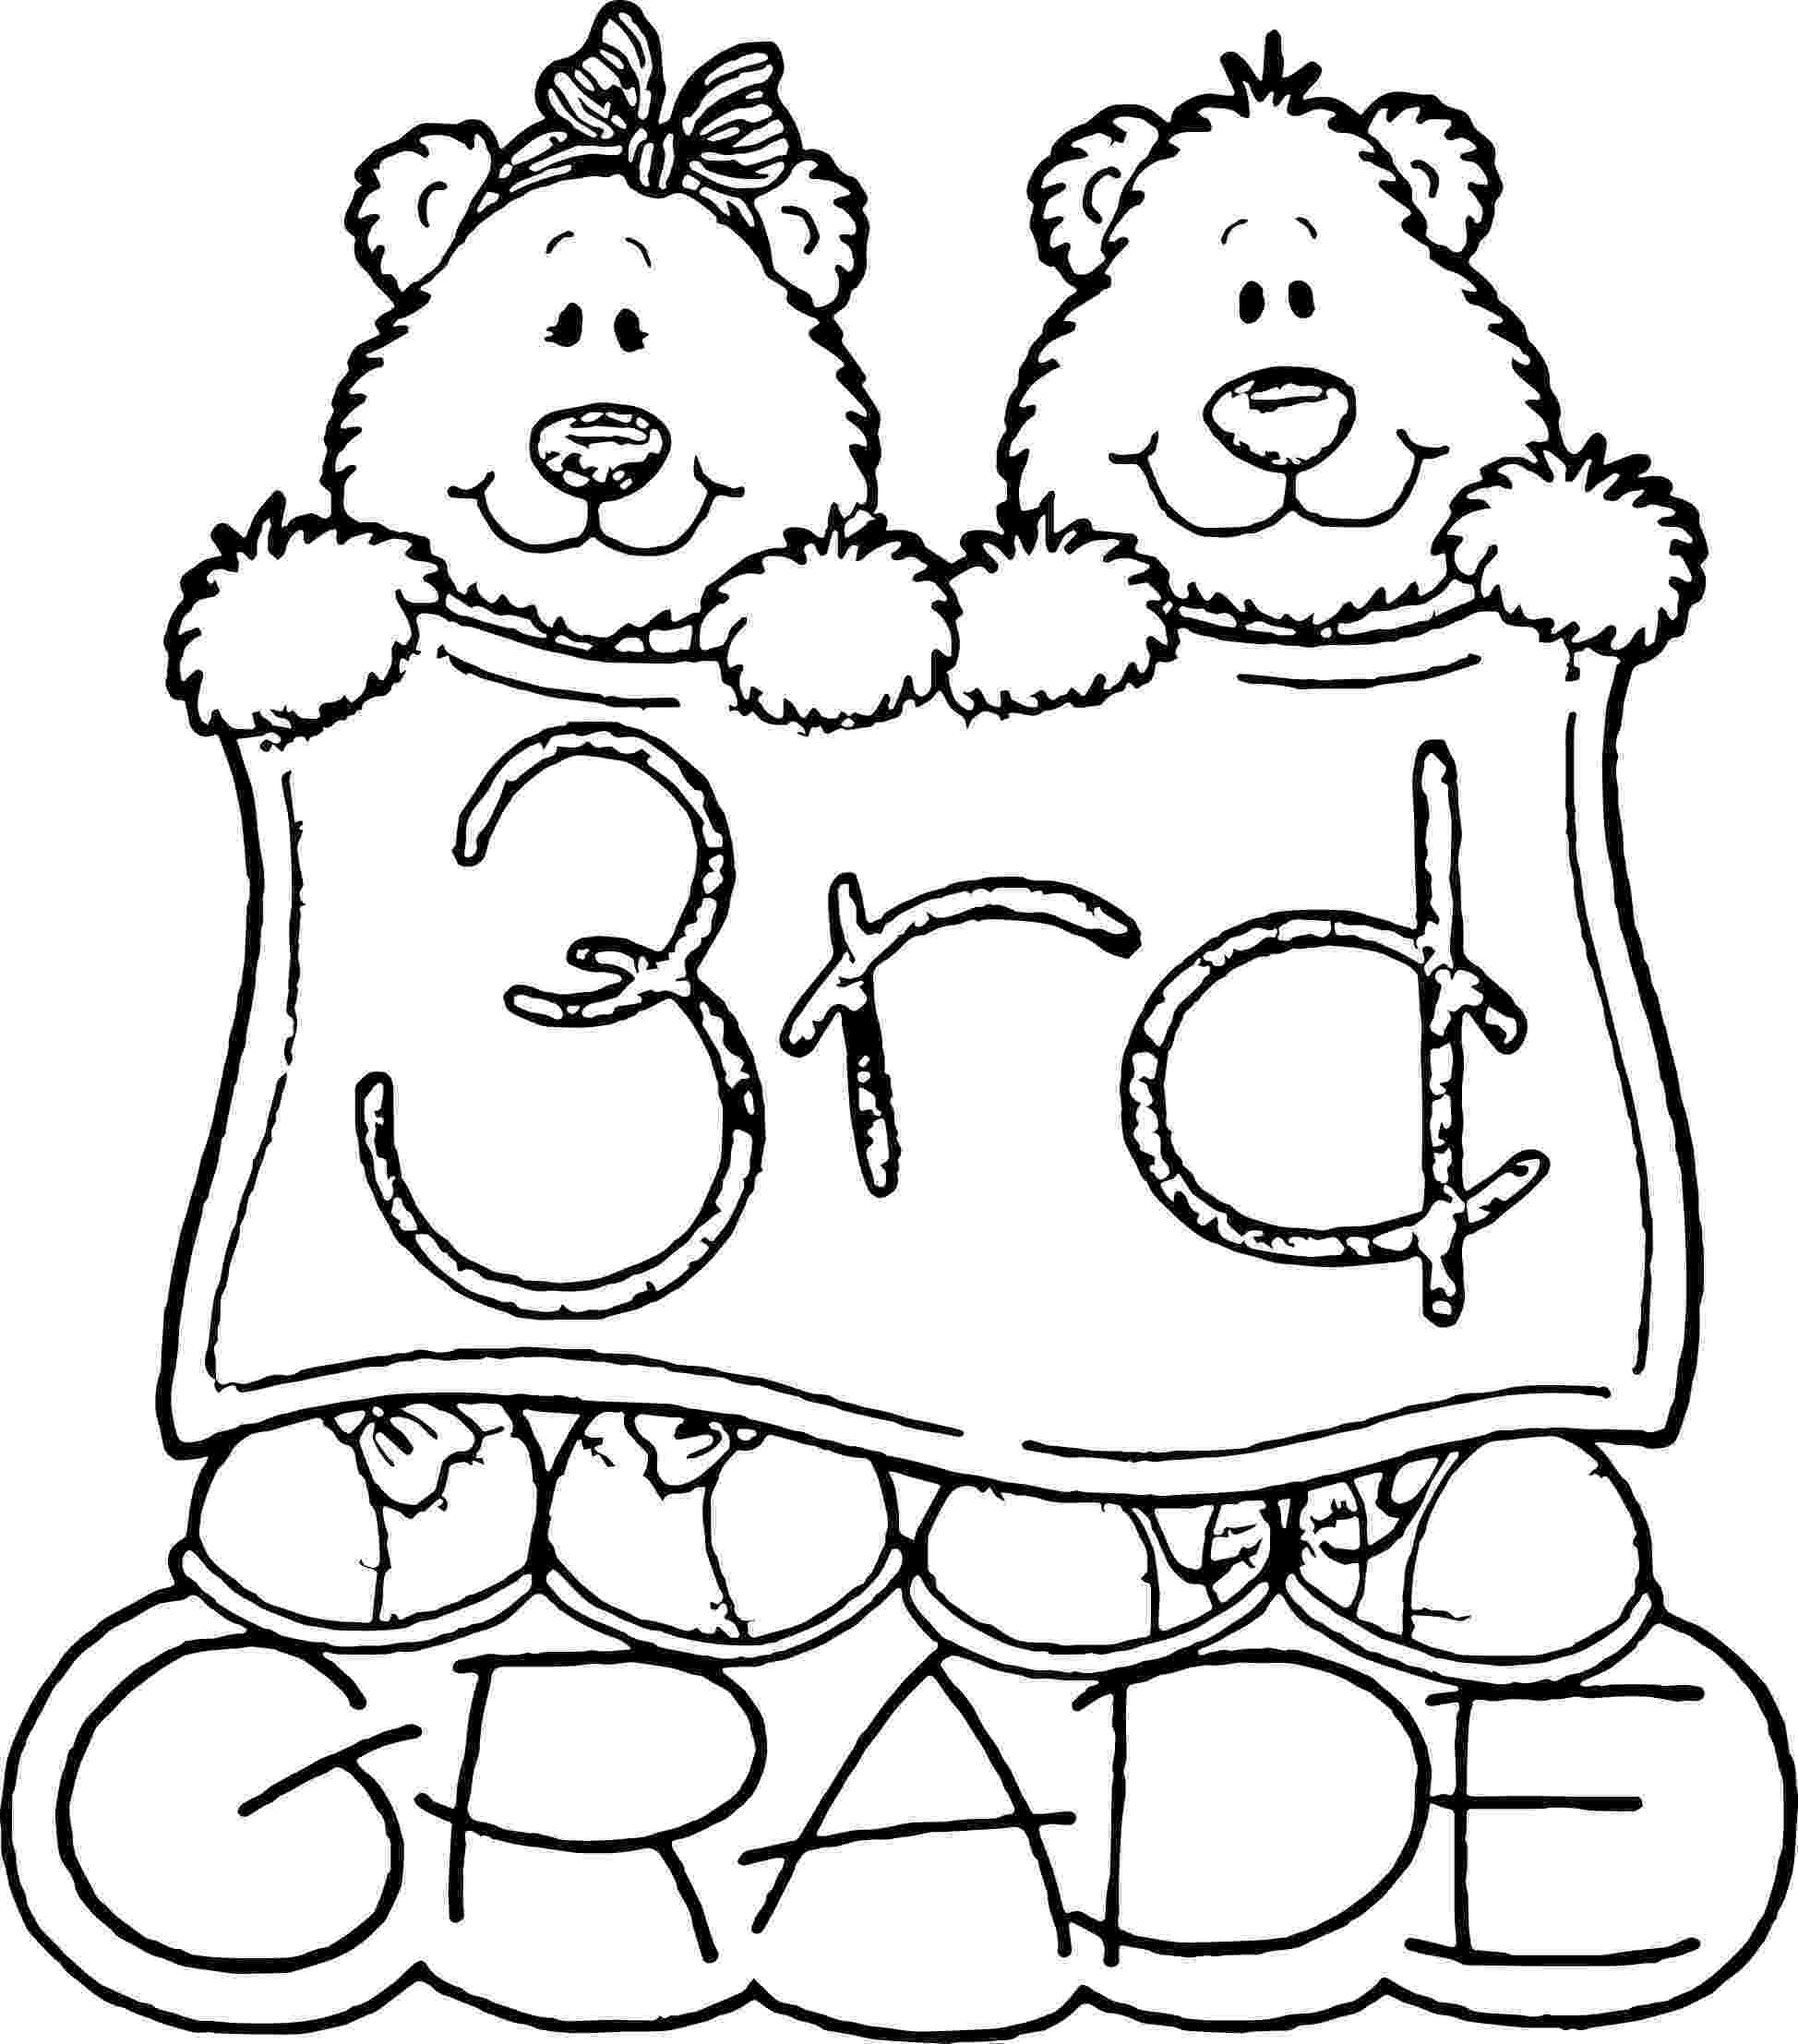 3rd grade coloring pages kt8p3rd grade educational coloring pages coloring pages 3rd grade 